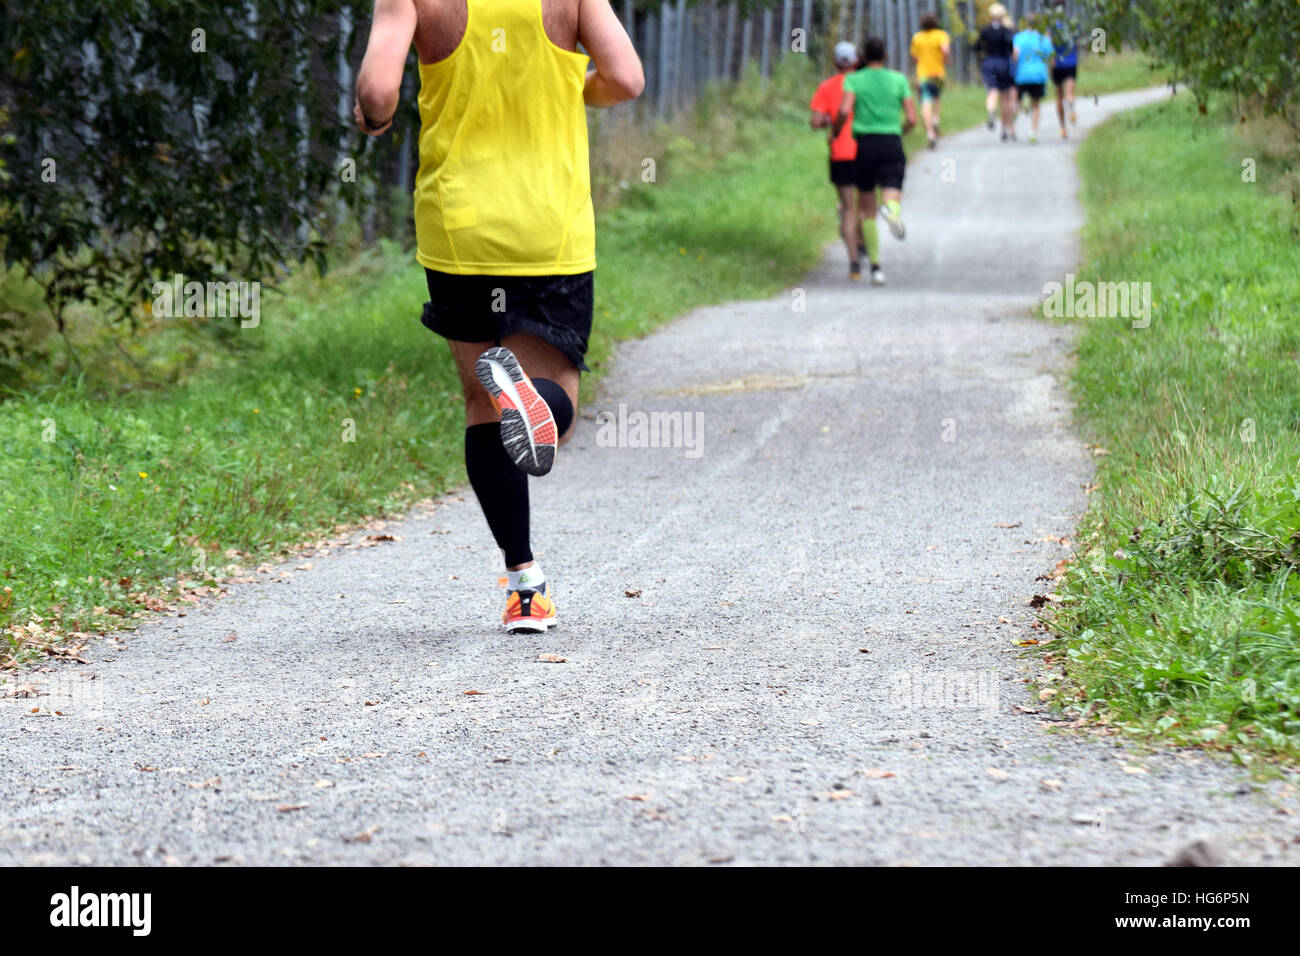 Running competition. Stock Photo